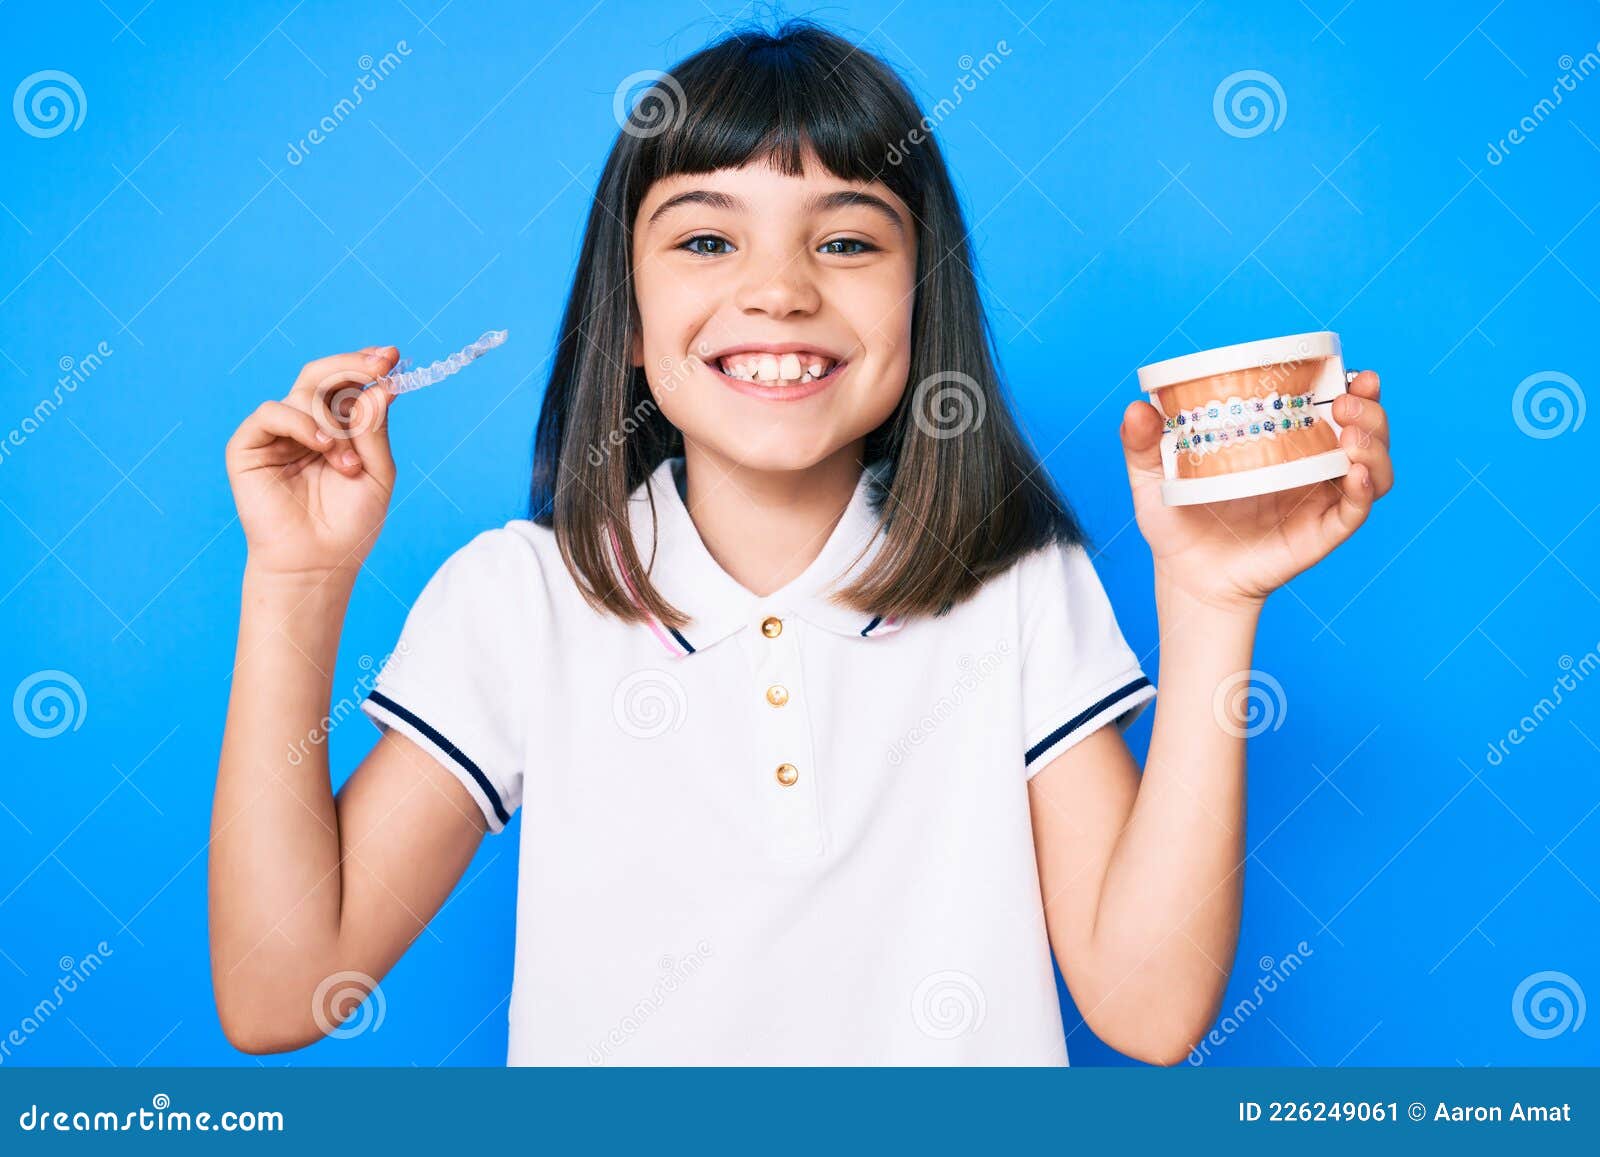 young little girl with bang holding invisible aligner orthodontic and braces smiling with a happy and cool smile on face